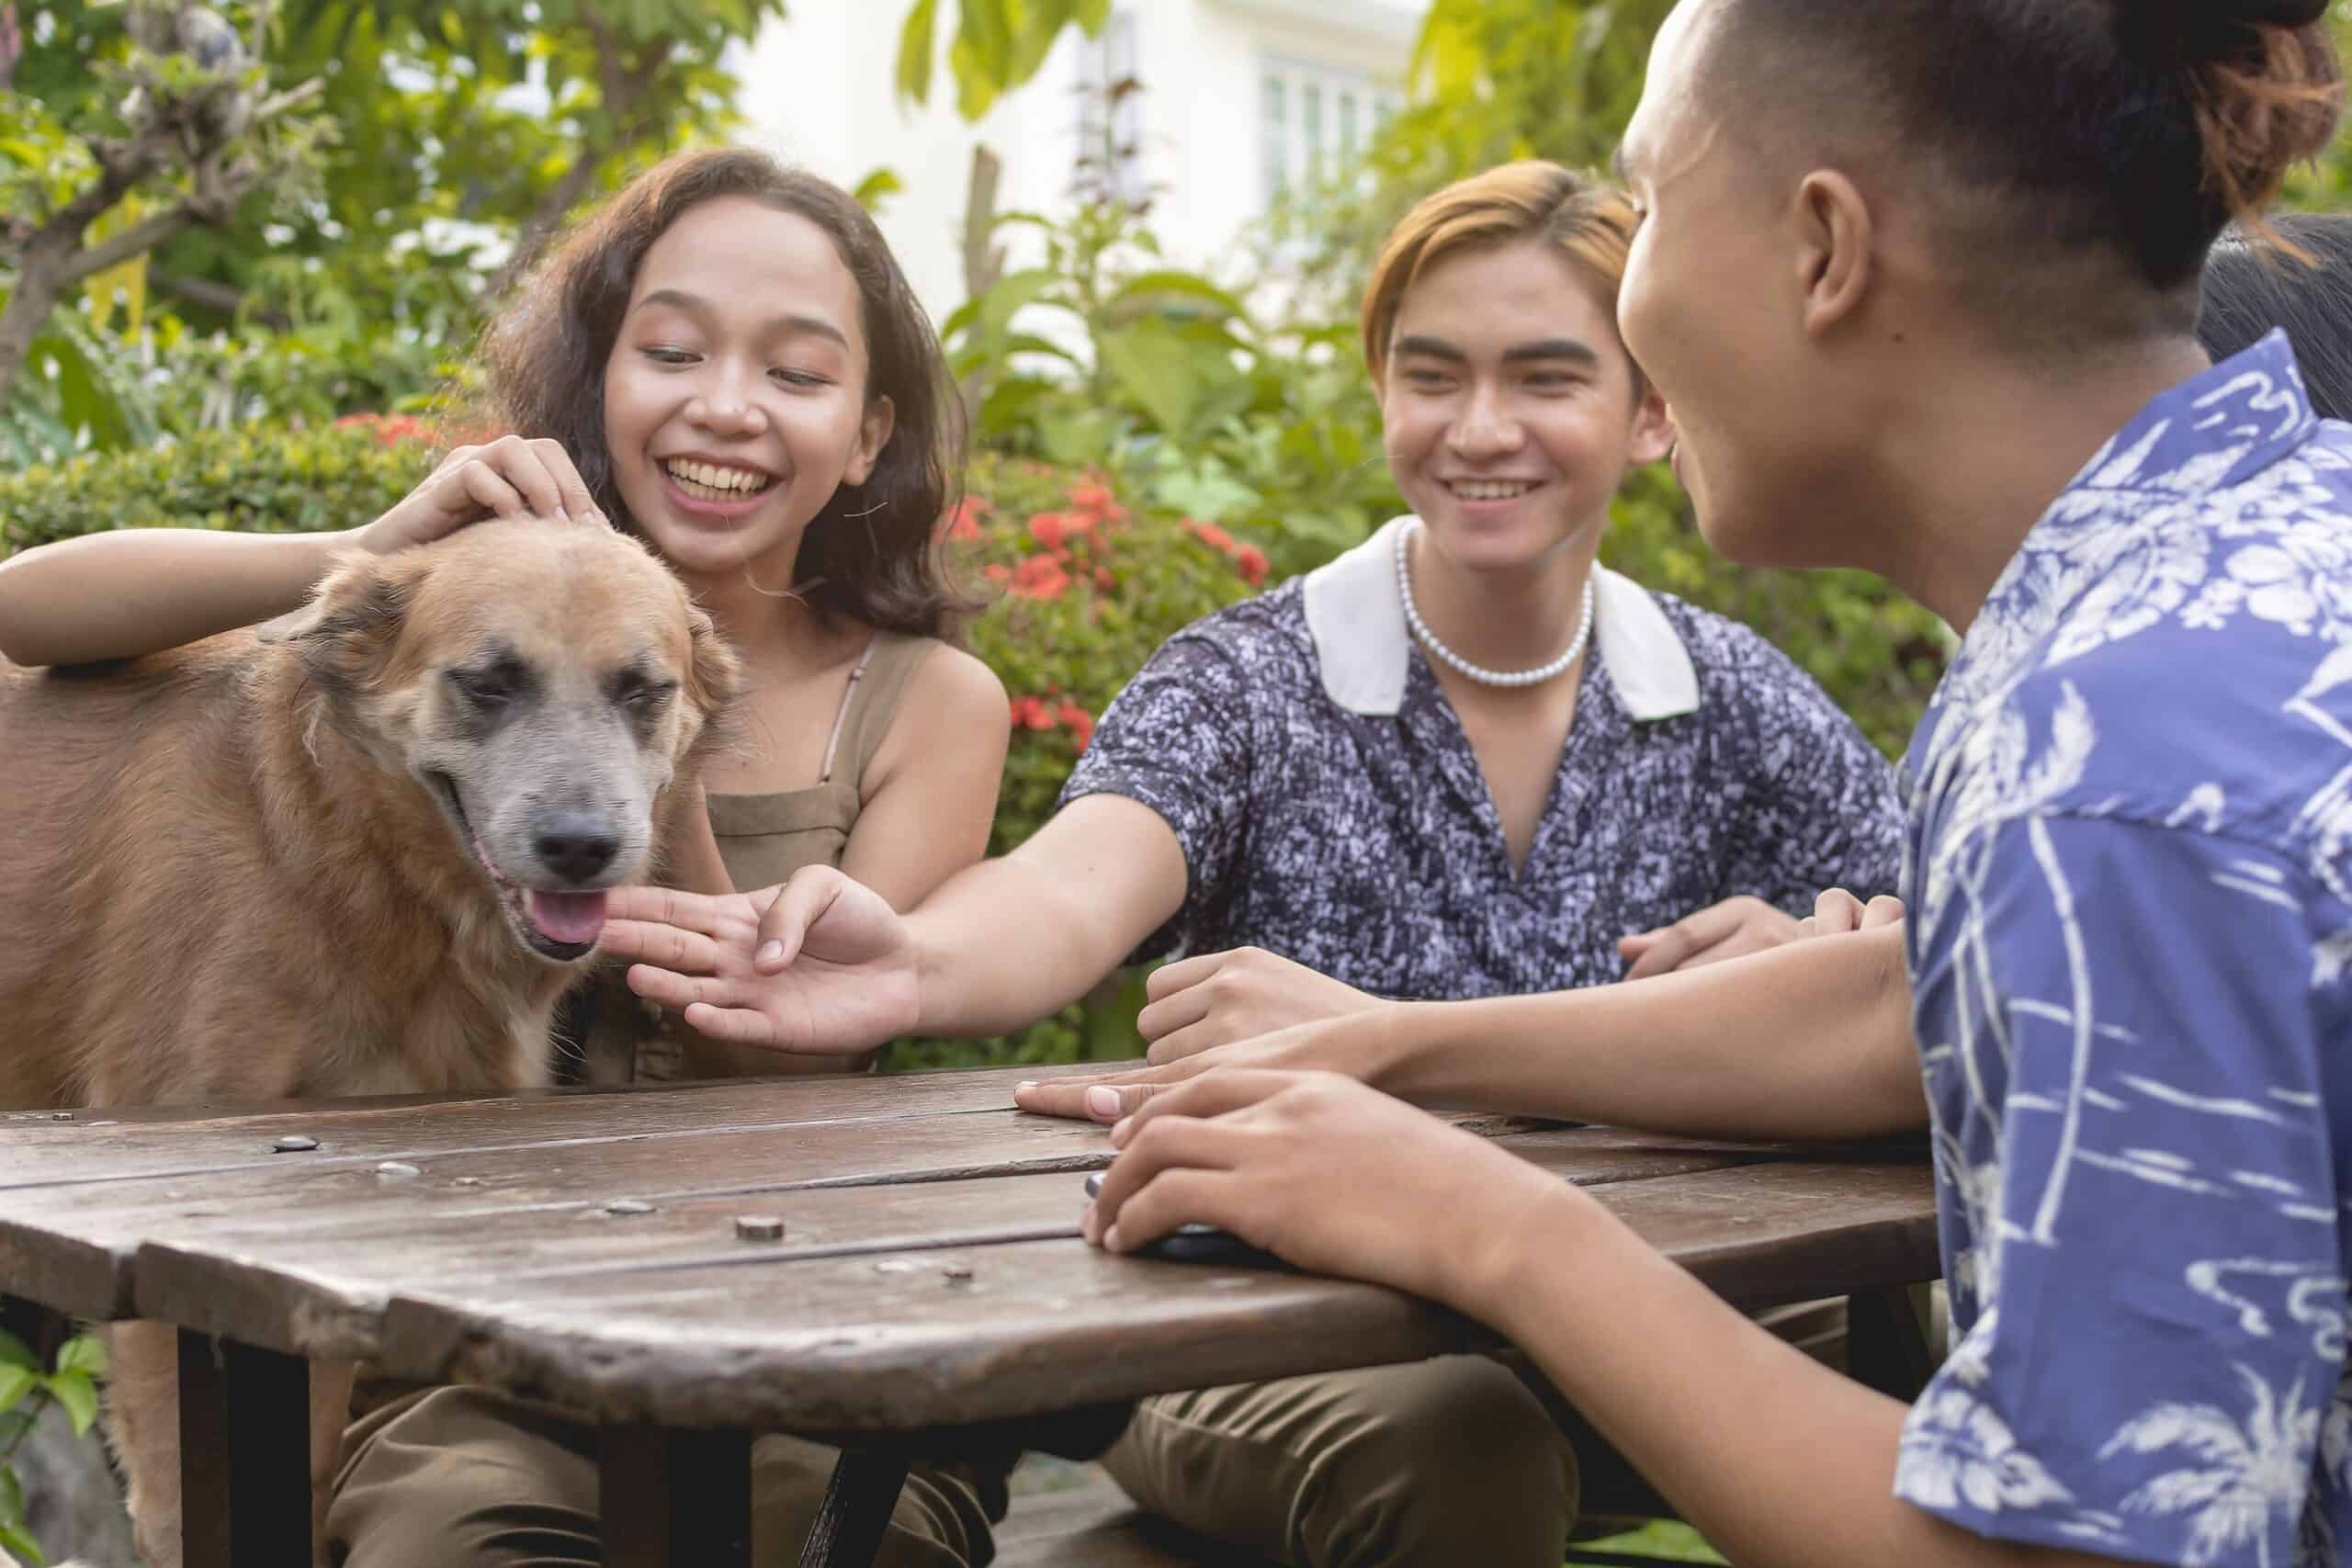 GenZers | A group of happy Gen Z friends hang out outside, sitting on a rustic bench and having fun with a friendly dog.